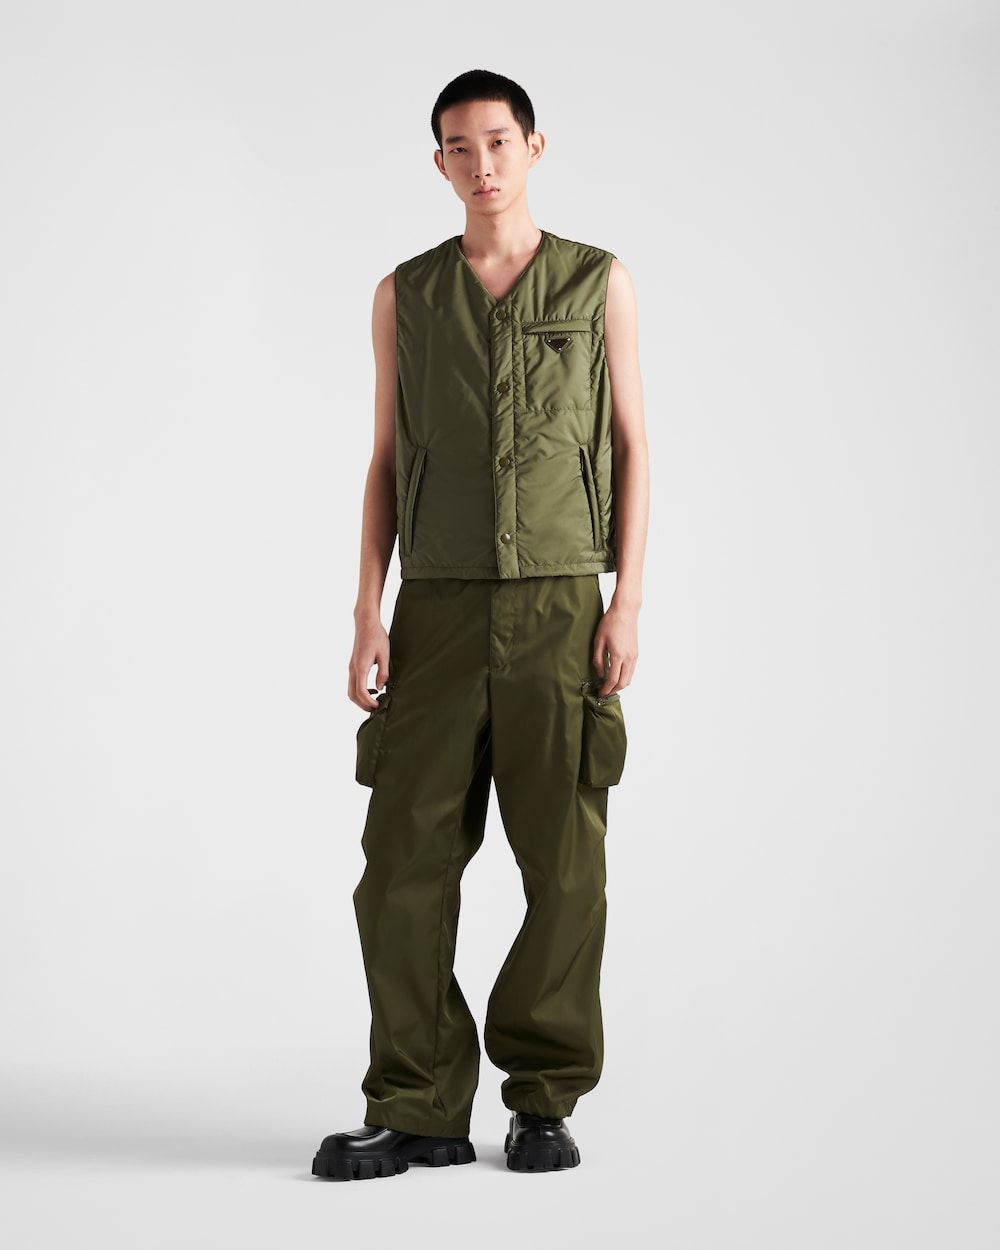 PRADA Recycled Men's Loden Green Pants - SS24 Collection